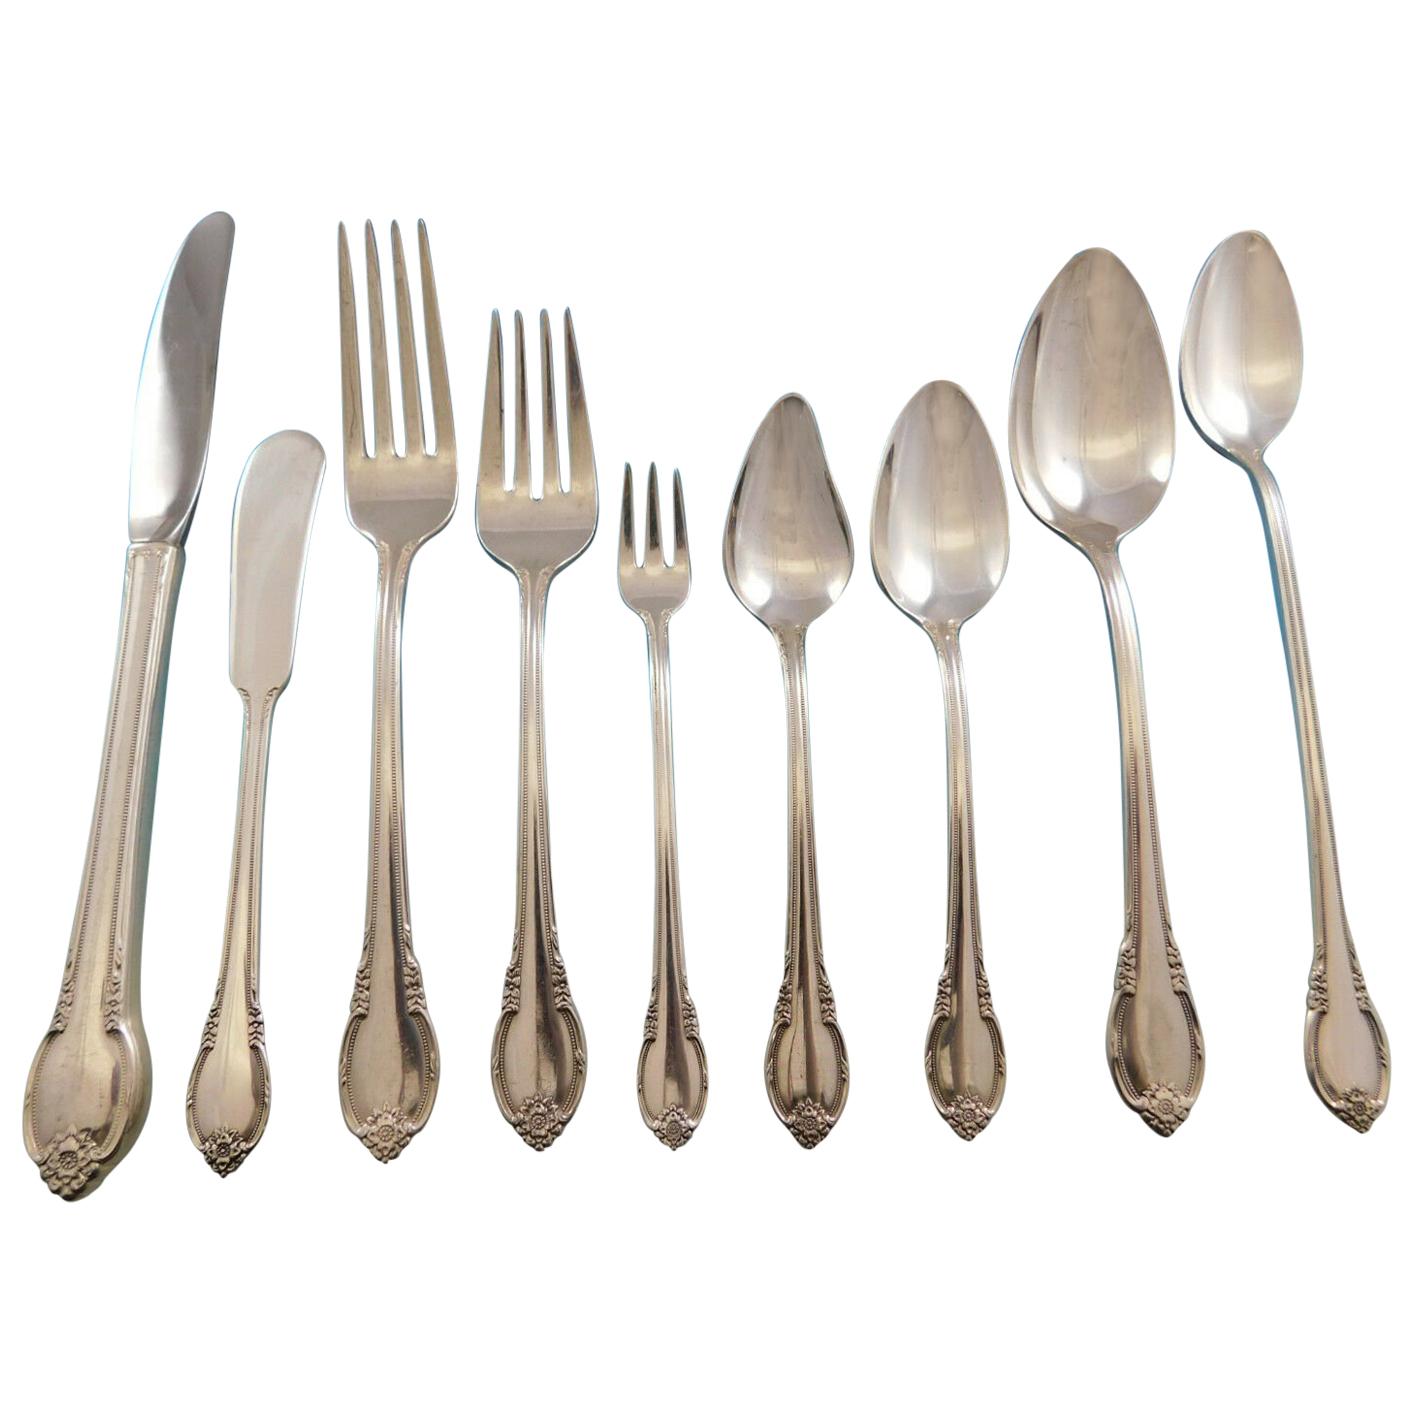 Details about   International Silver Rogers Stainless BOSTON COMMON Serving Tablespoon Flatware 